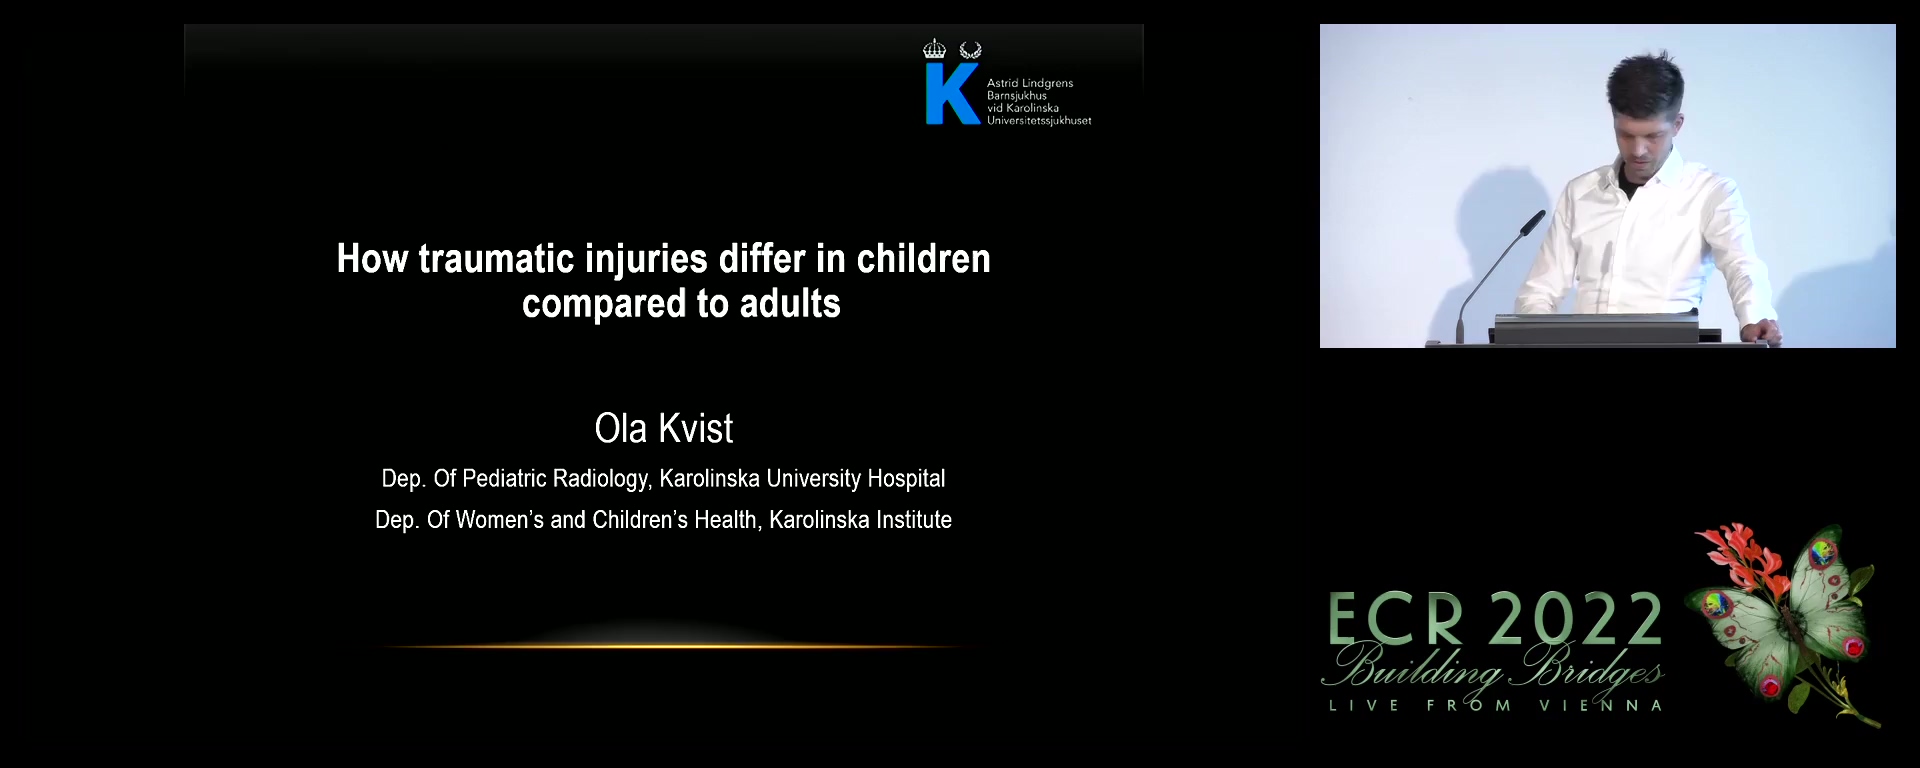 How traumatic injuries differ in children compared to adults